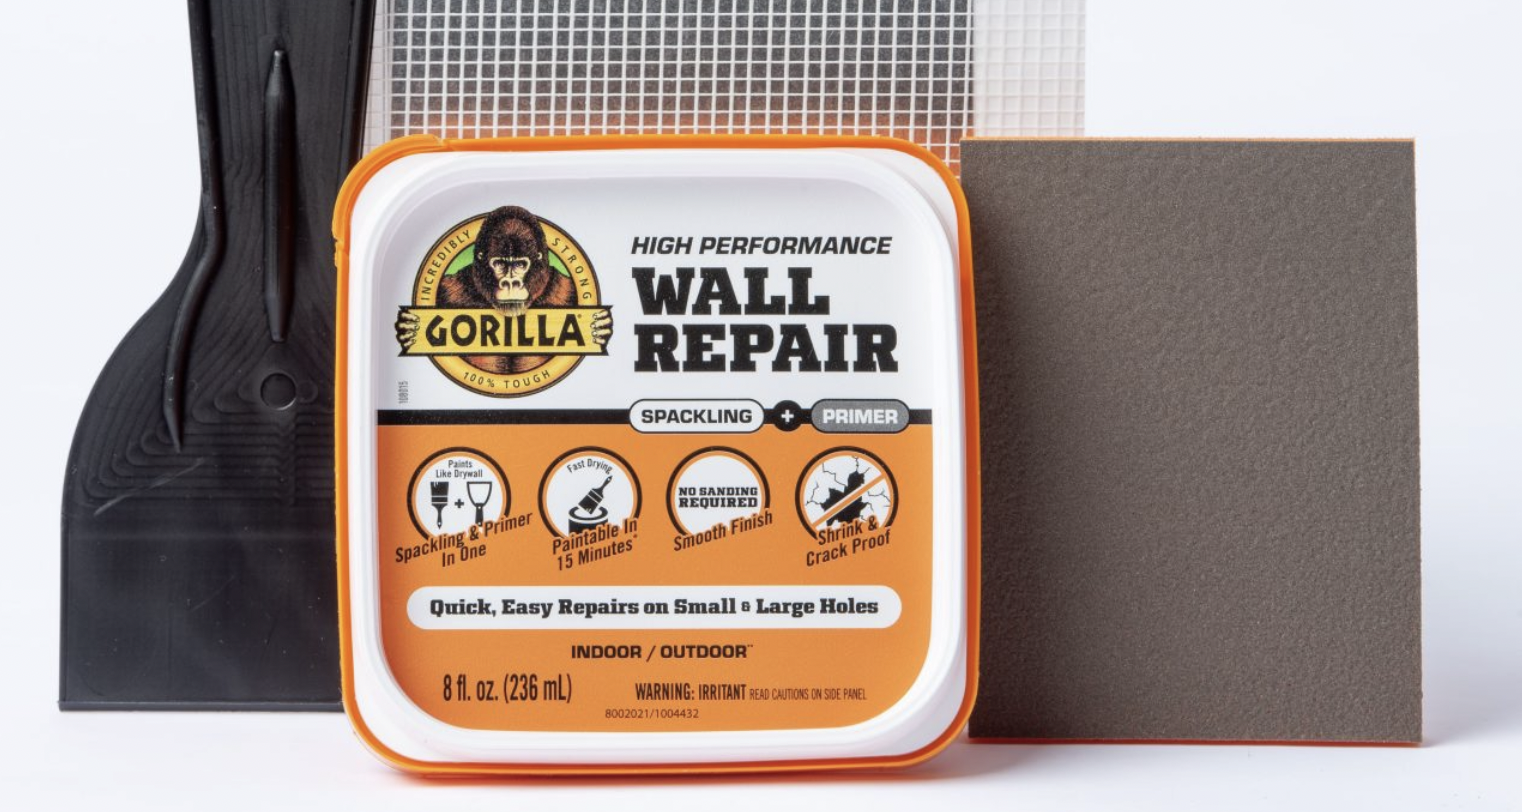 New Gorilla Glue product makes fixing holes in walls easy as - The